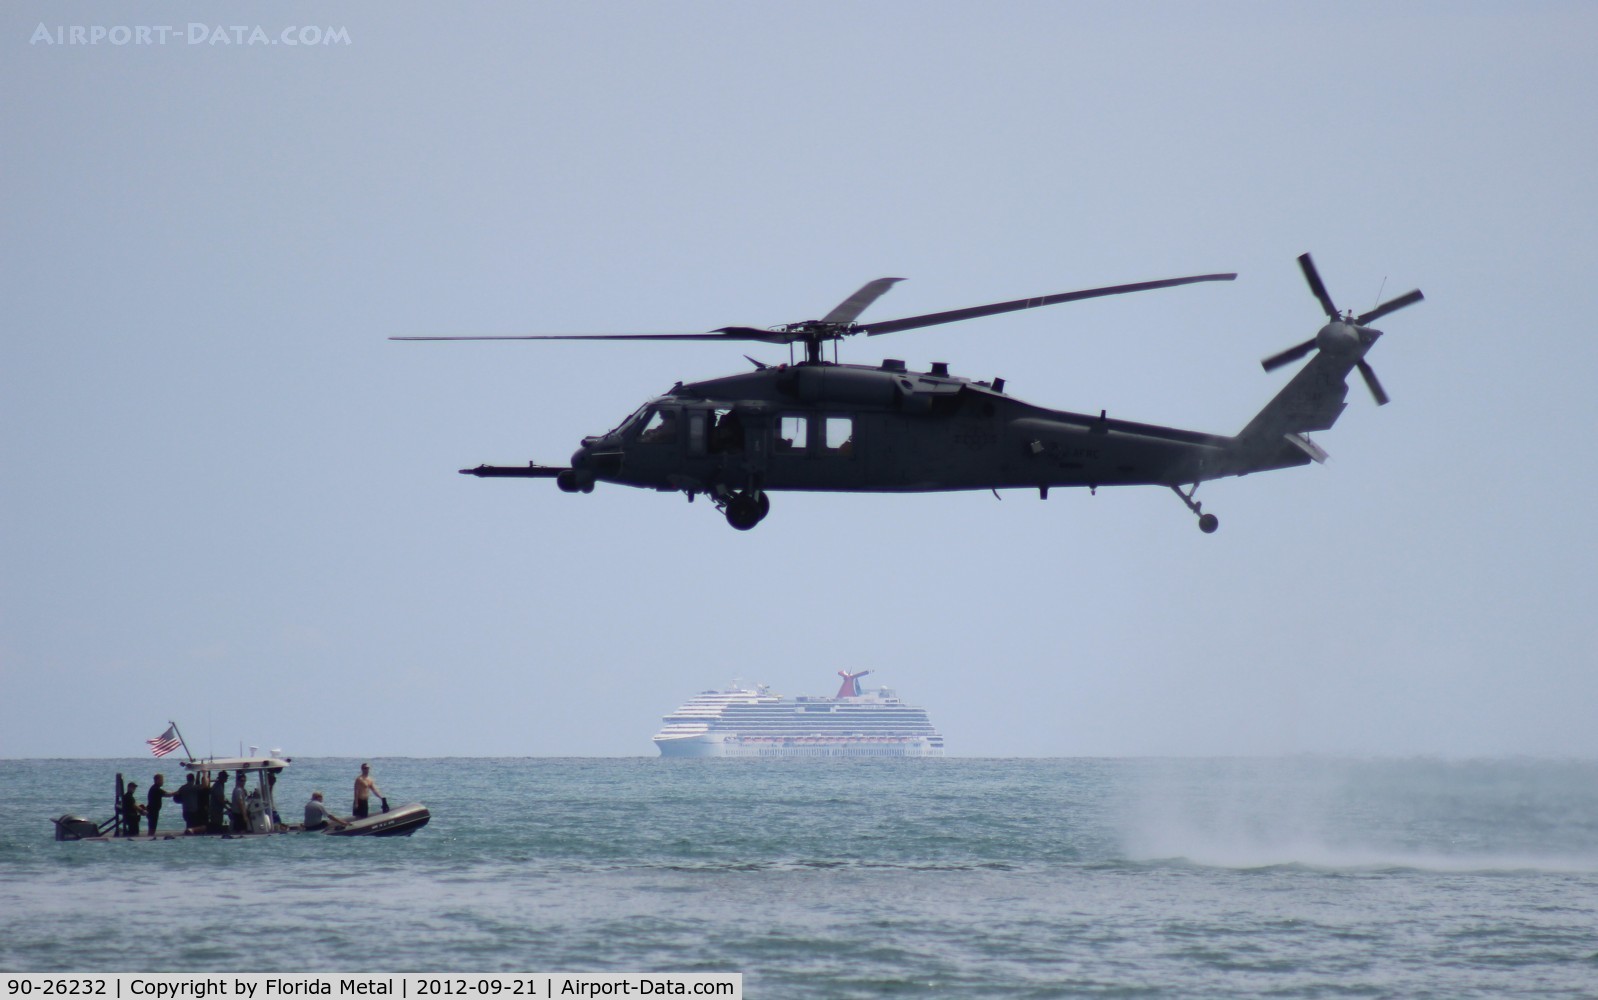 90-26232, 1990 Sikorsky HH-60L Black Hawk C/N 701599, HH-60L demo over Cocoa Beach, Carnival Cruise Lines arriving to Port Canaveral in background